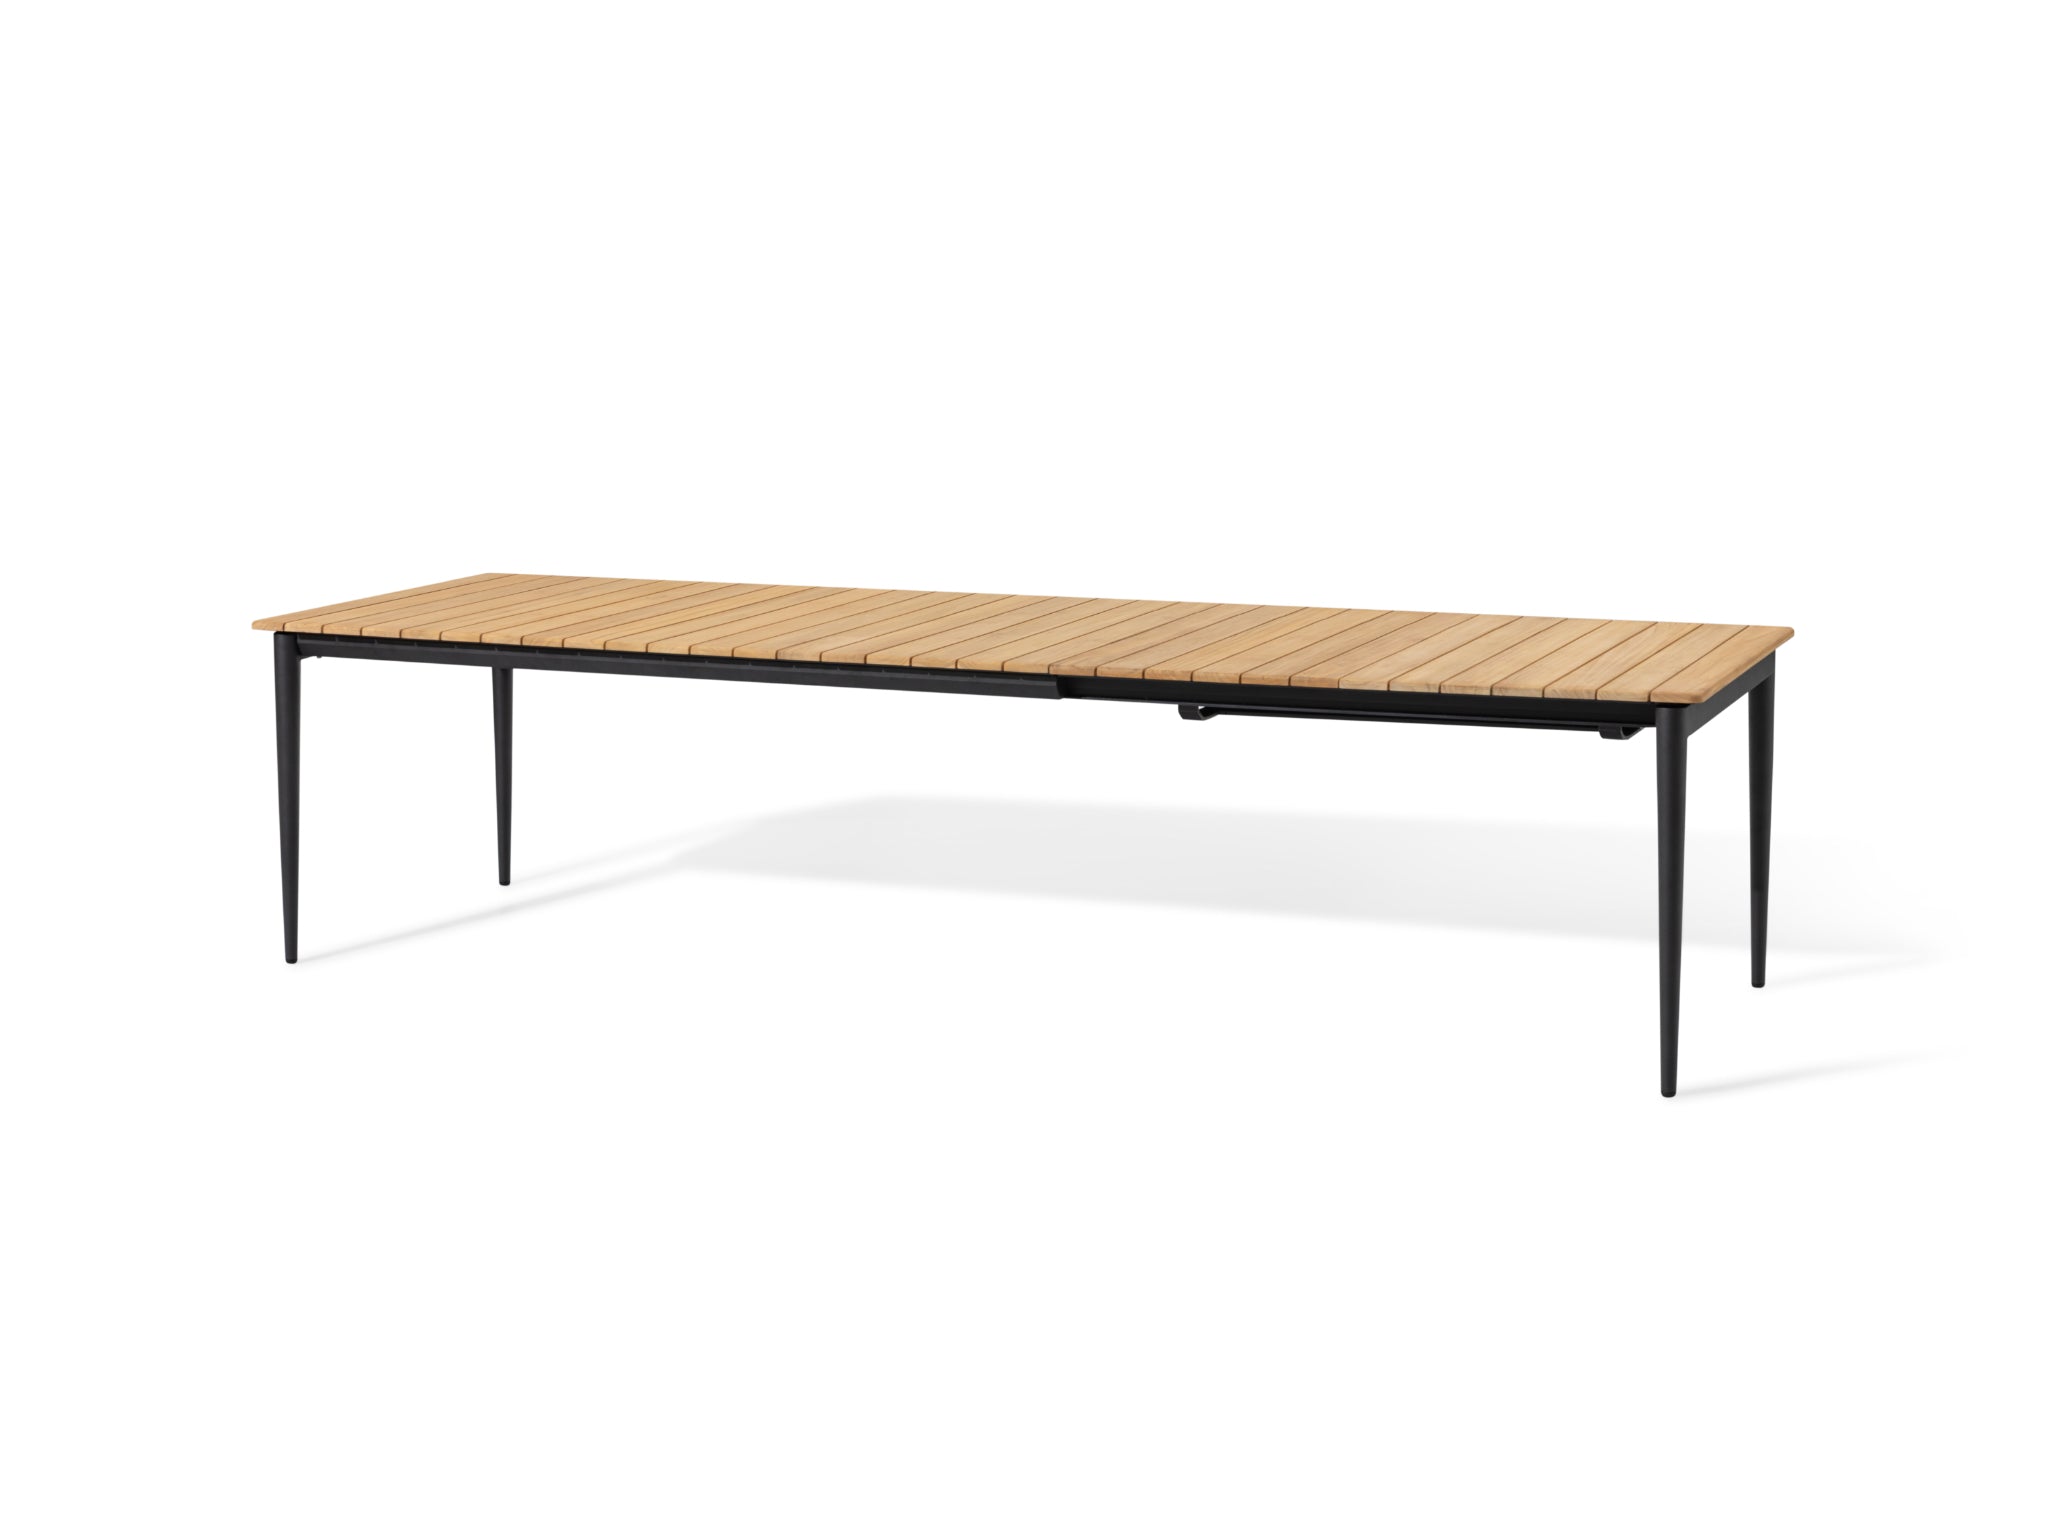 SIMPO by Sunlongarden Axis Extendable Dining Table